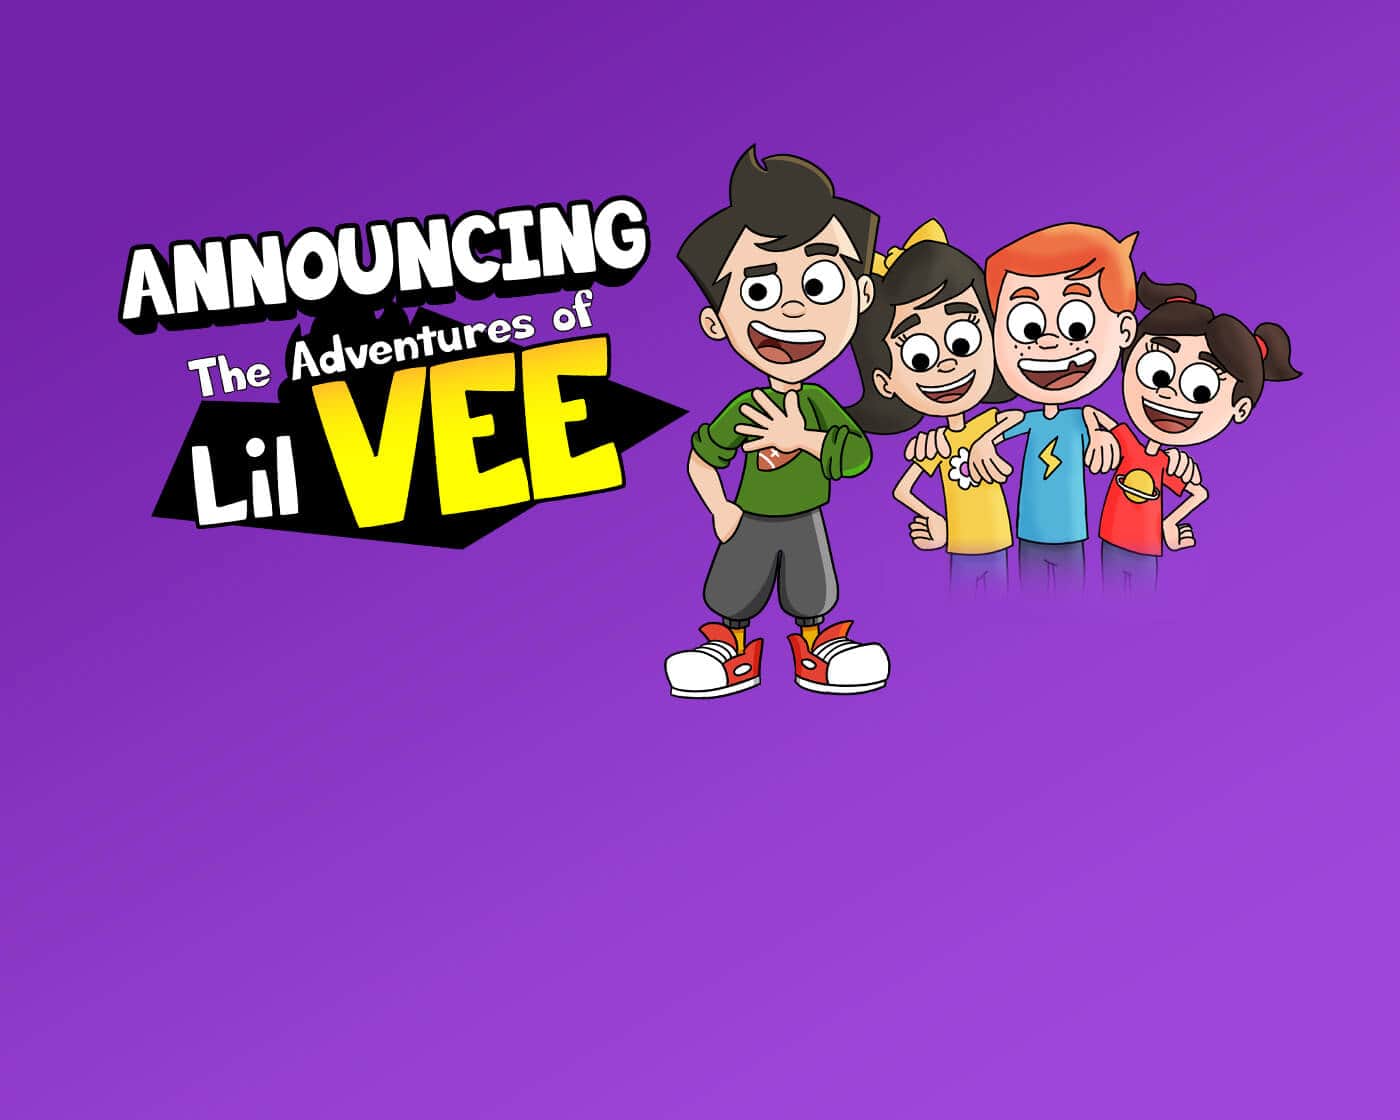 My New Show for Kids: “The Adventures of Lil’ Vee”